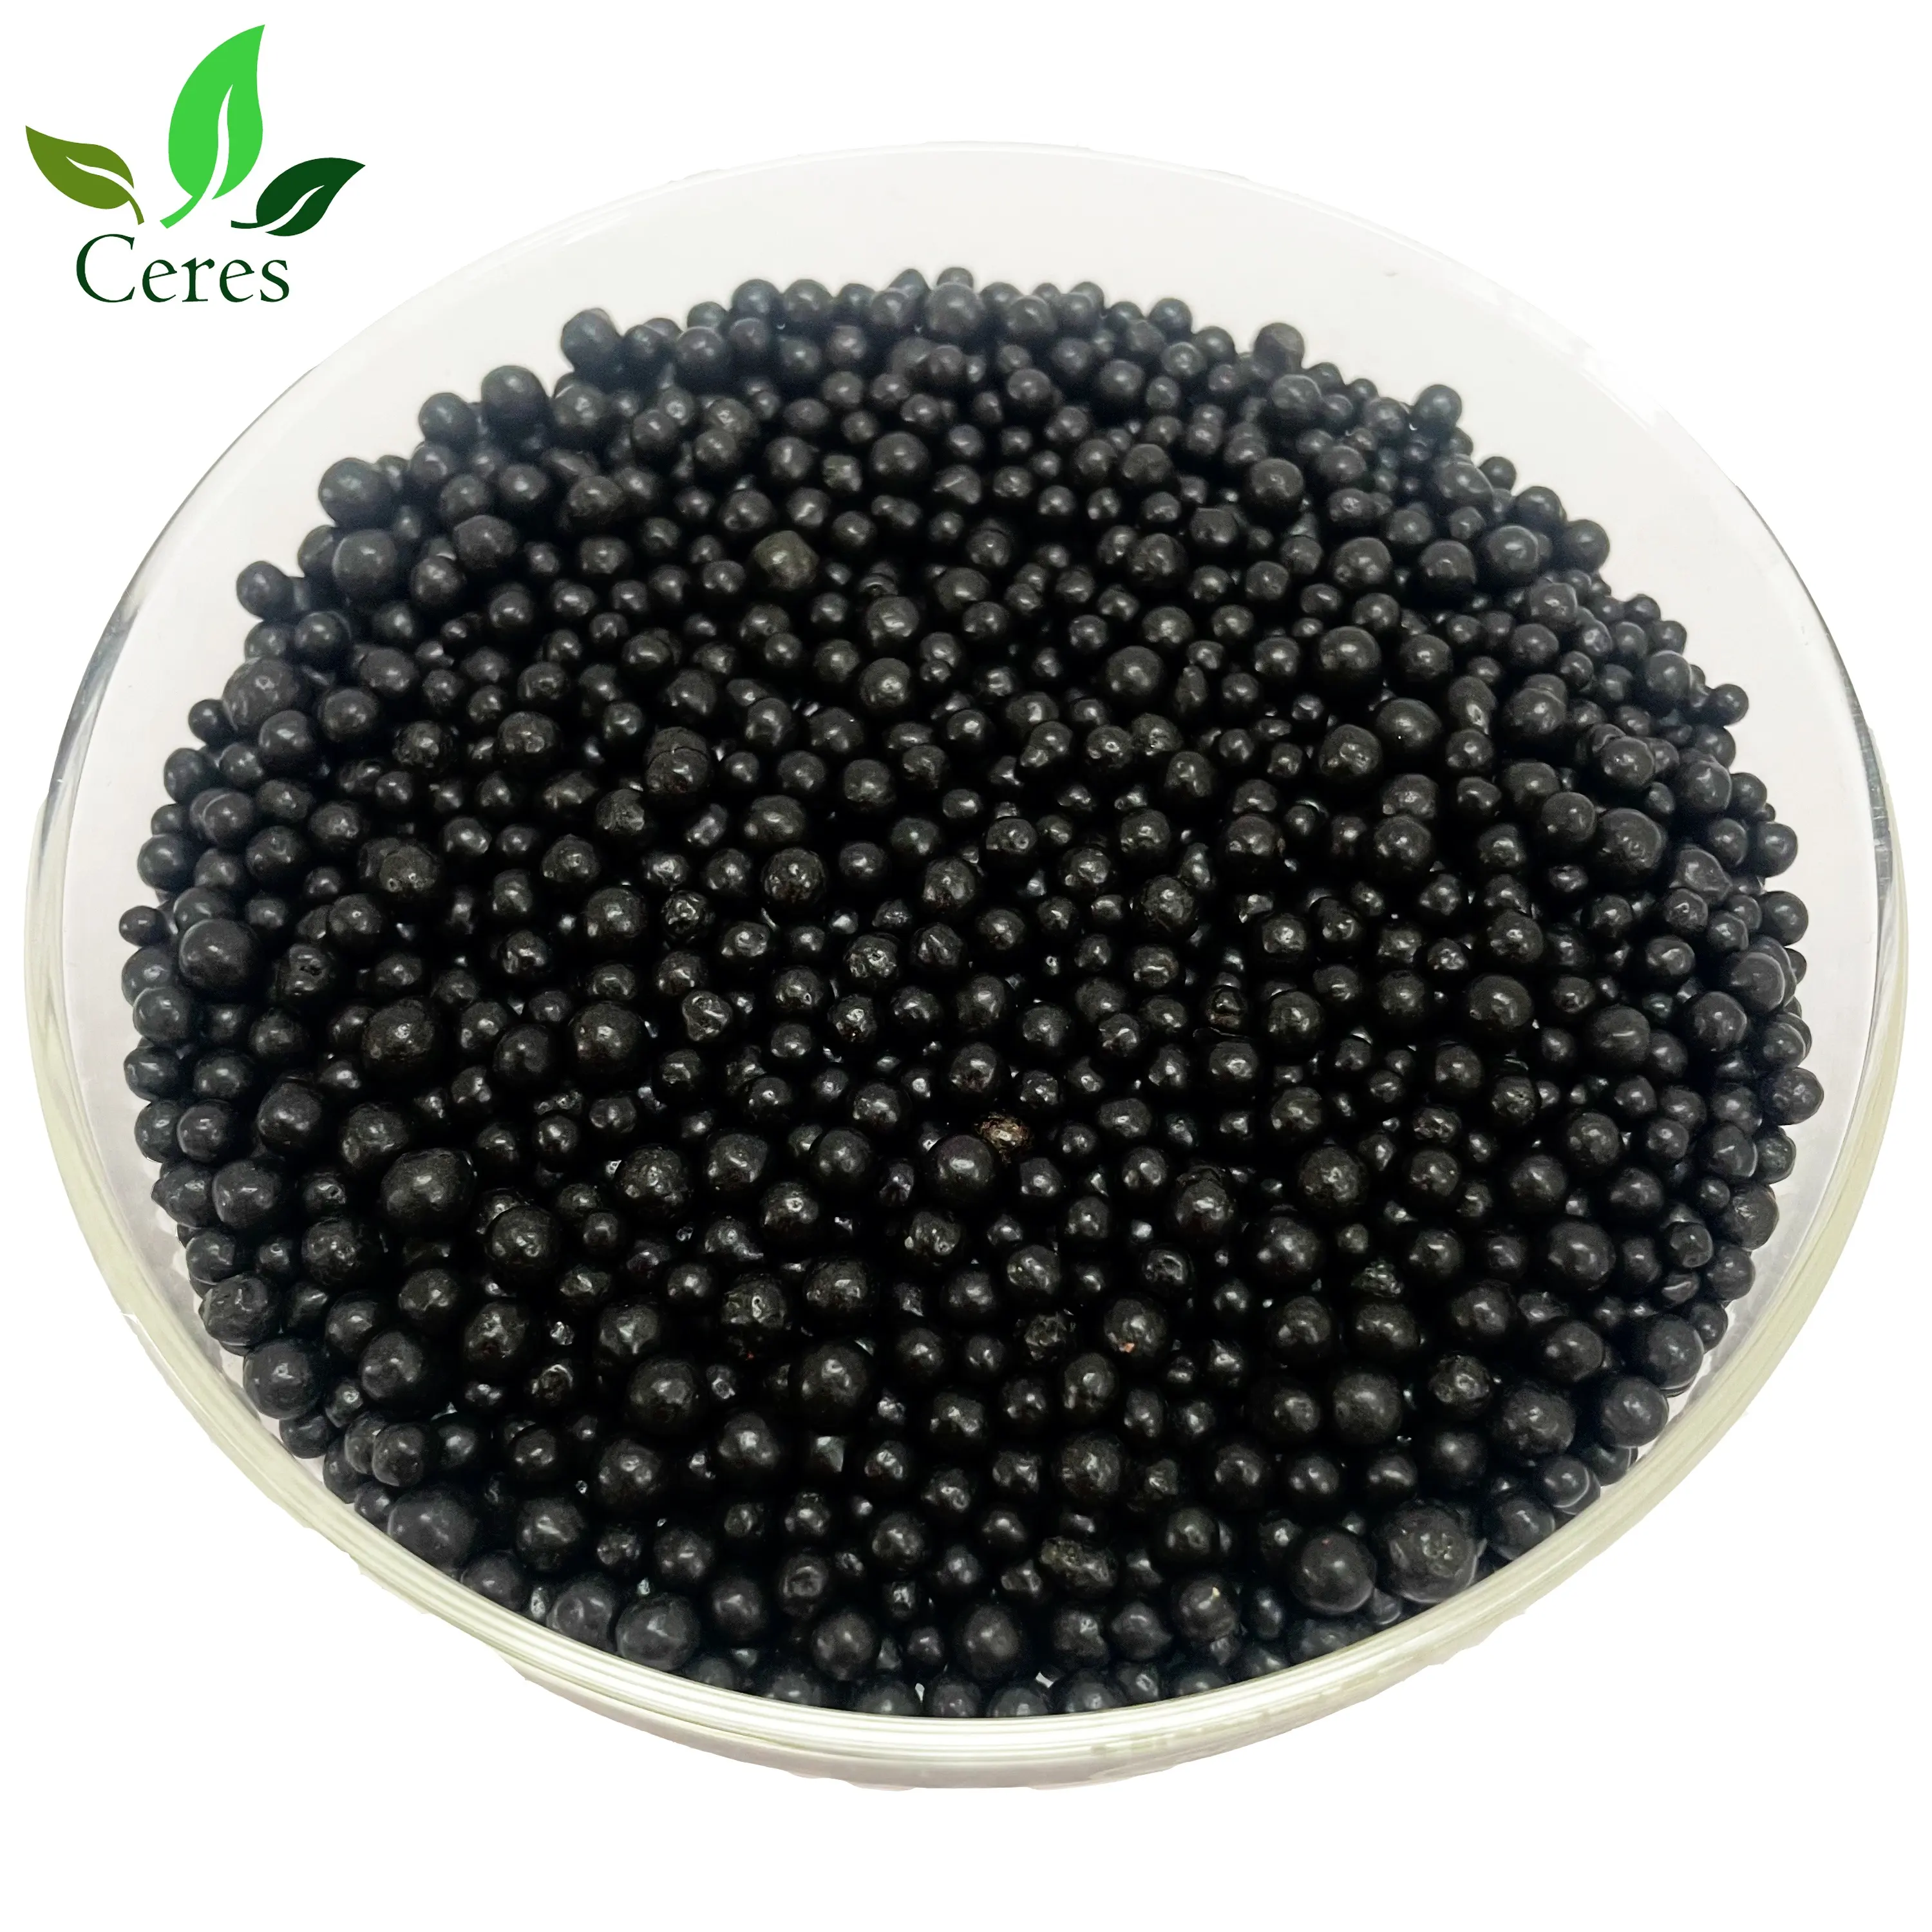 Ceres Humic Amino Granules Wholesale from Indian Manufacturer at Chinese Factory Price for Exports globally humic & fulvic amino